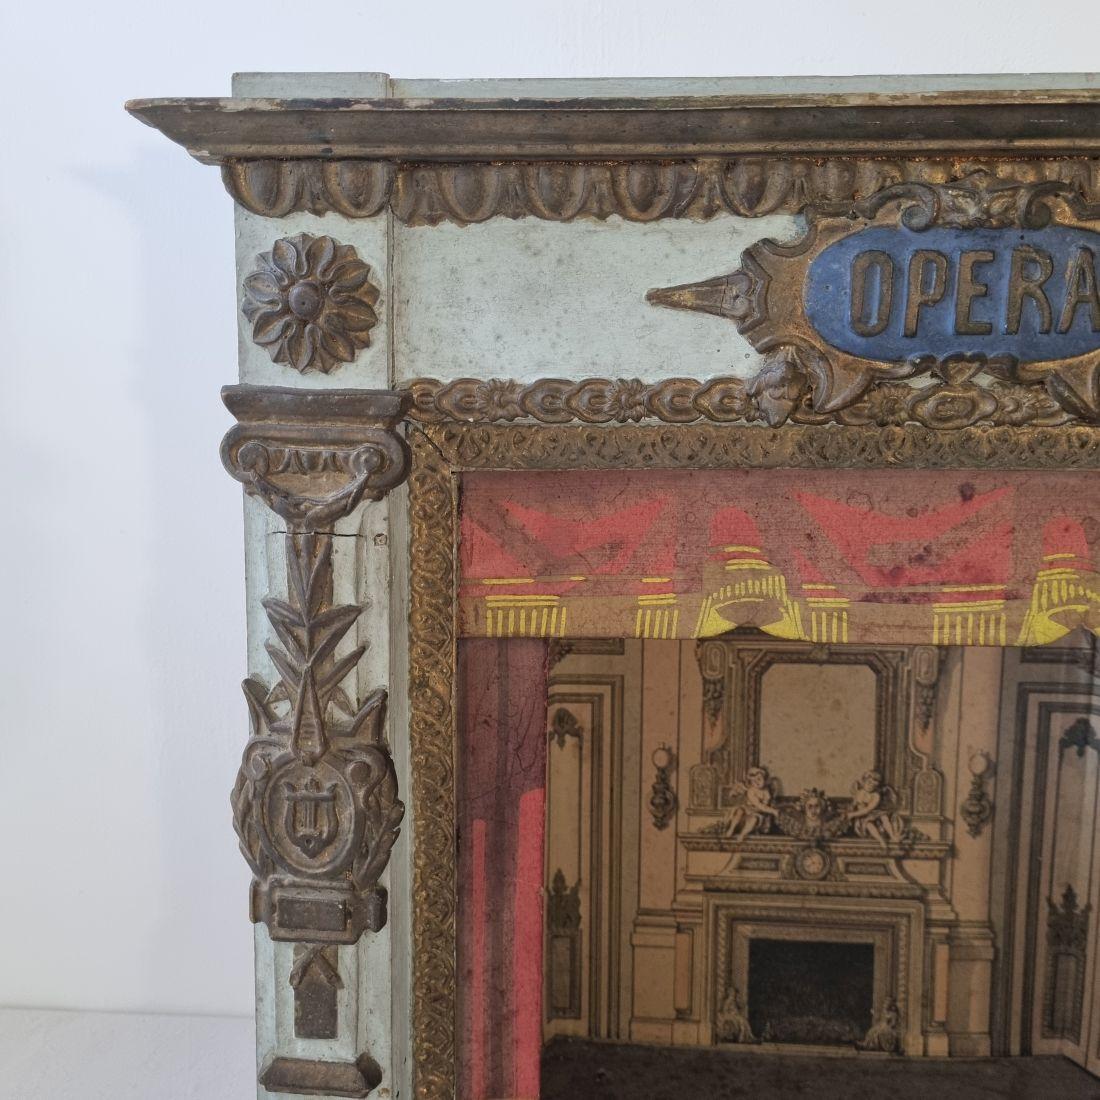  Late 19th century French Puppet Opera Theater 3